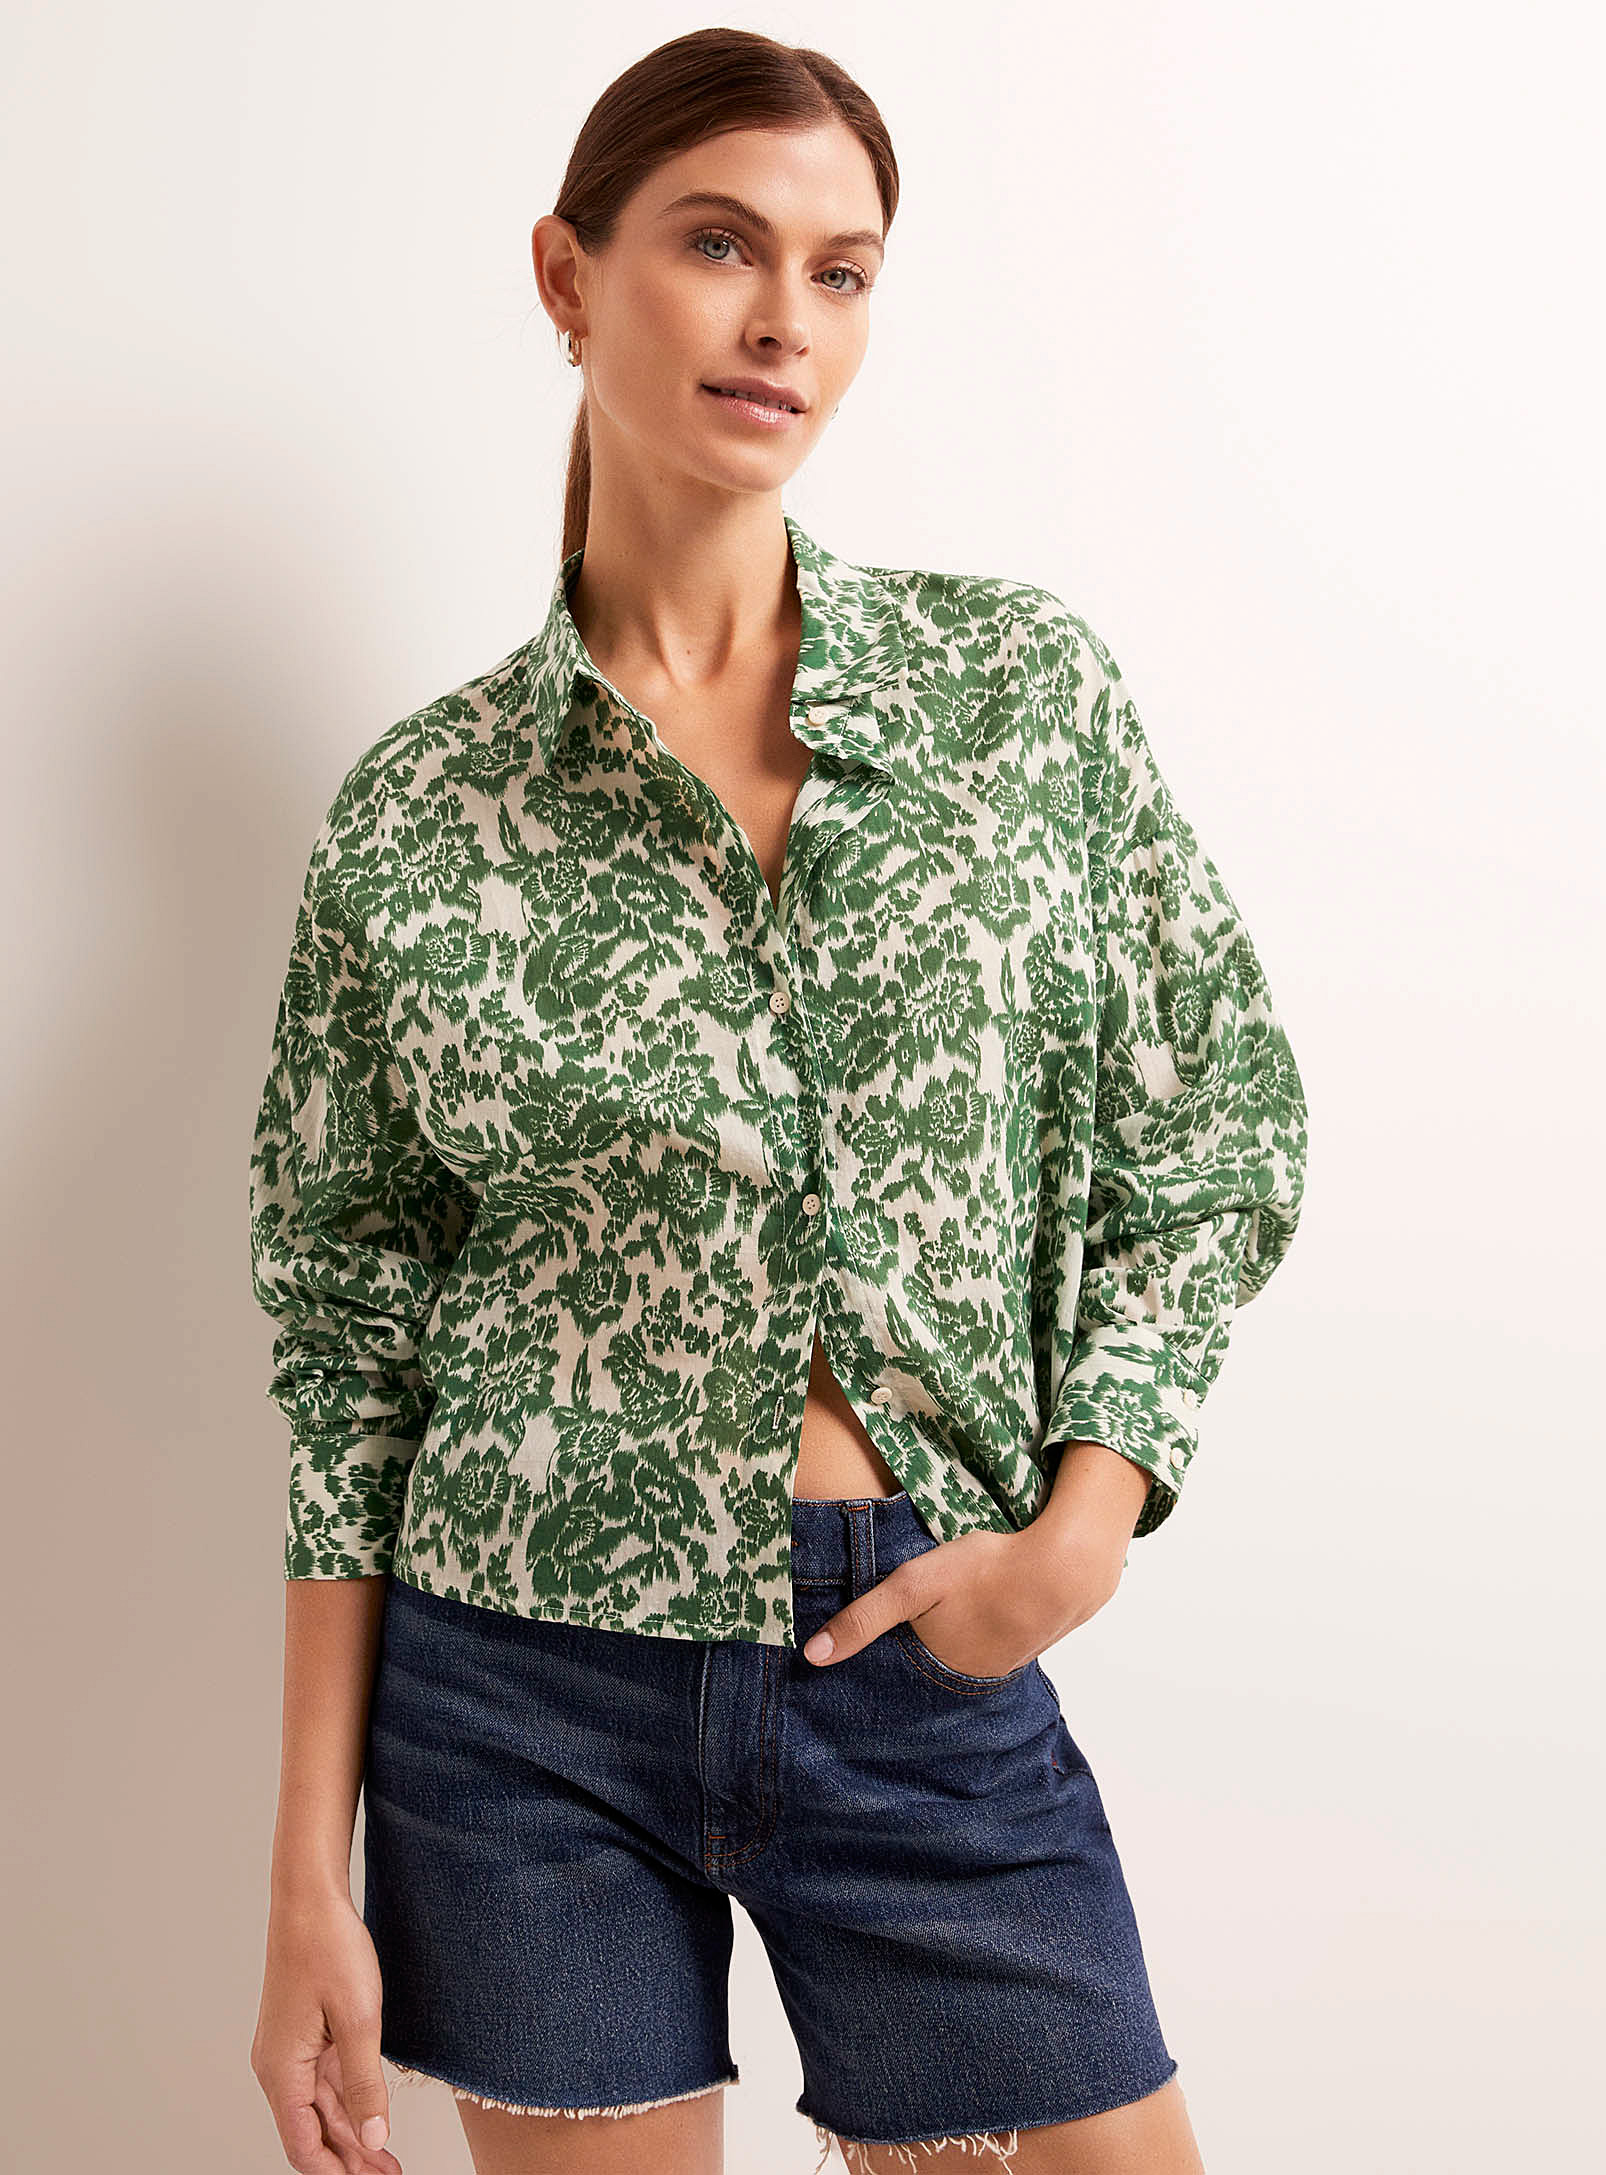 Thekorner Lush Garden Voile Loose Shirt In Patterned Green